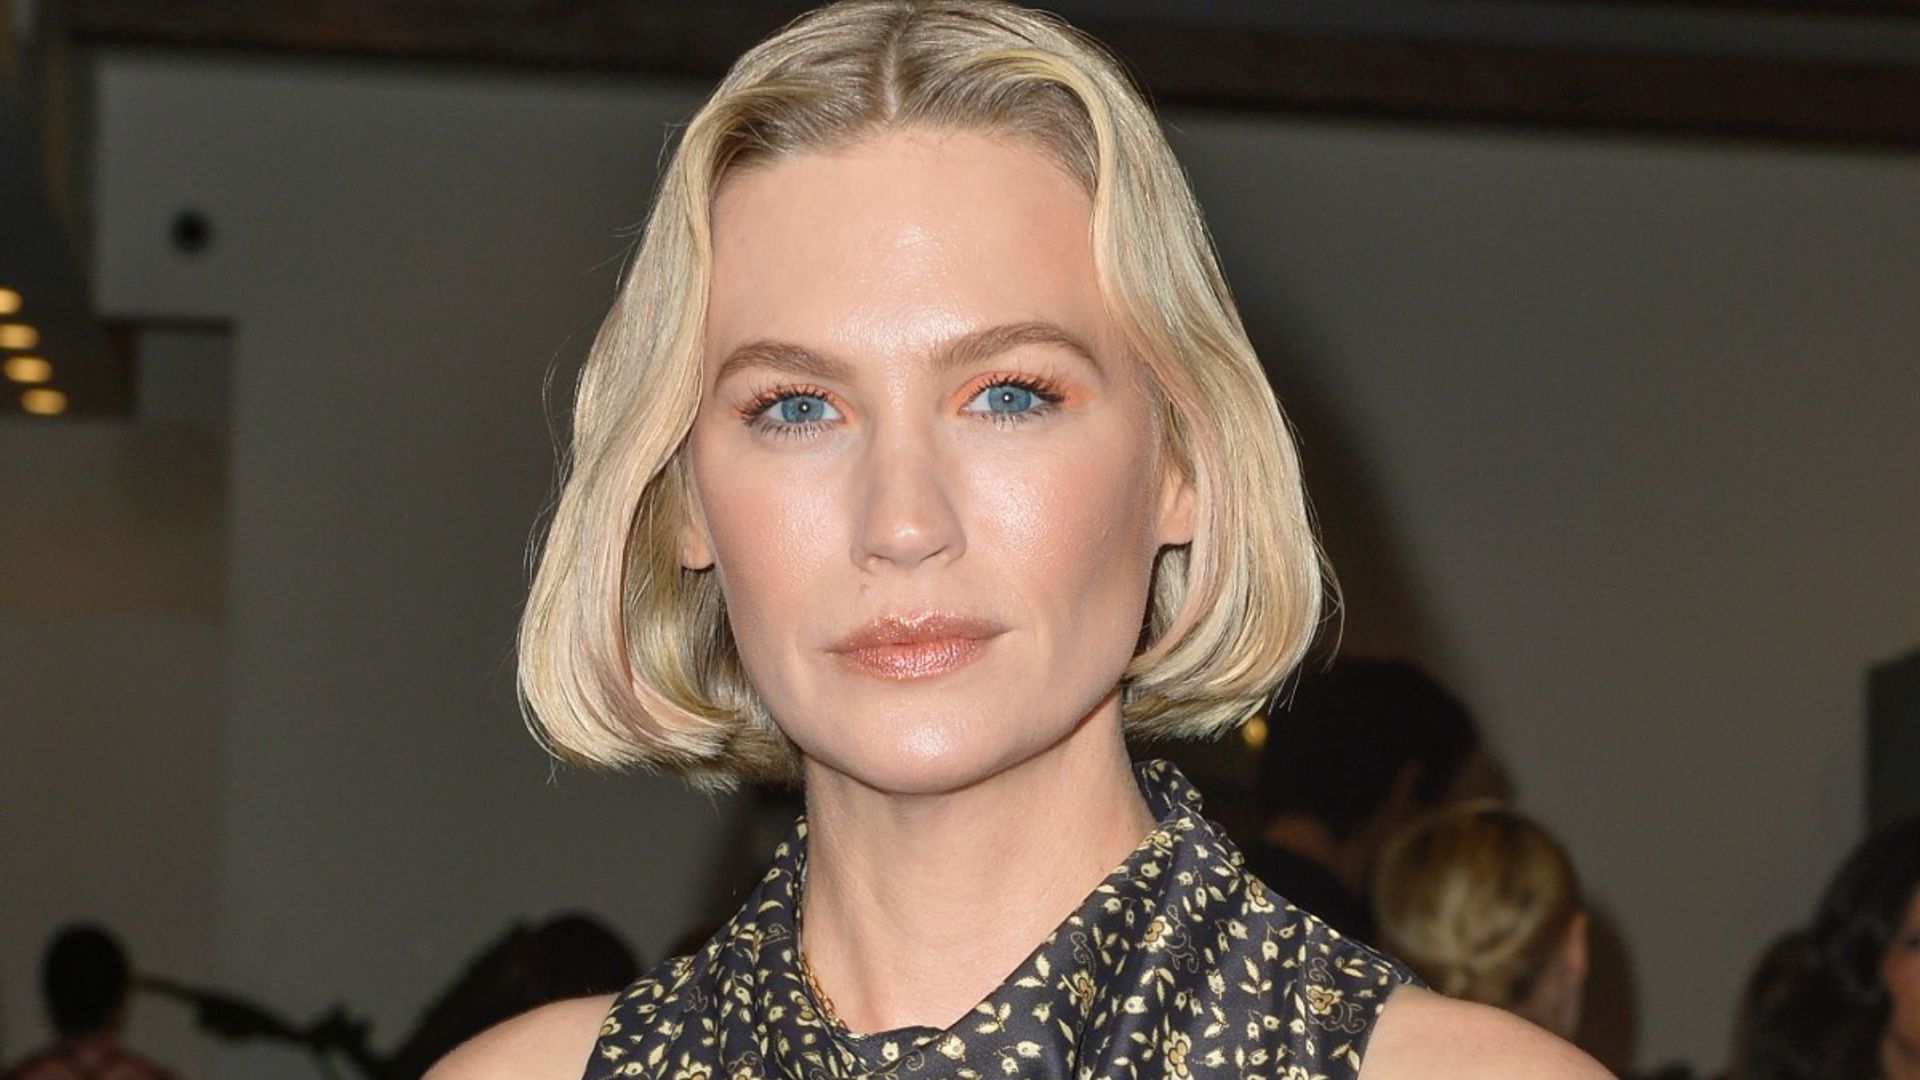 January Jones shares hilarious hair journey as she struggles with regrettable haircut